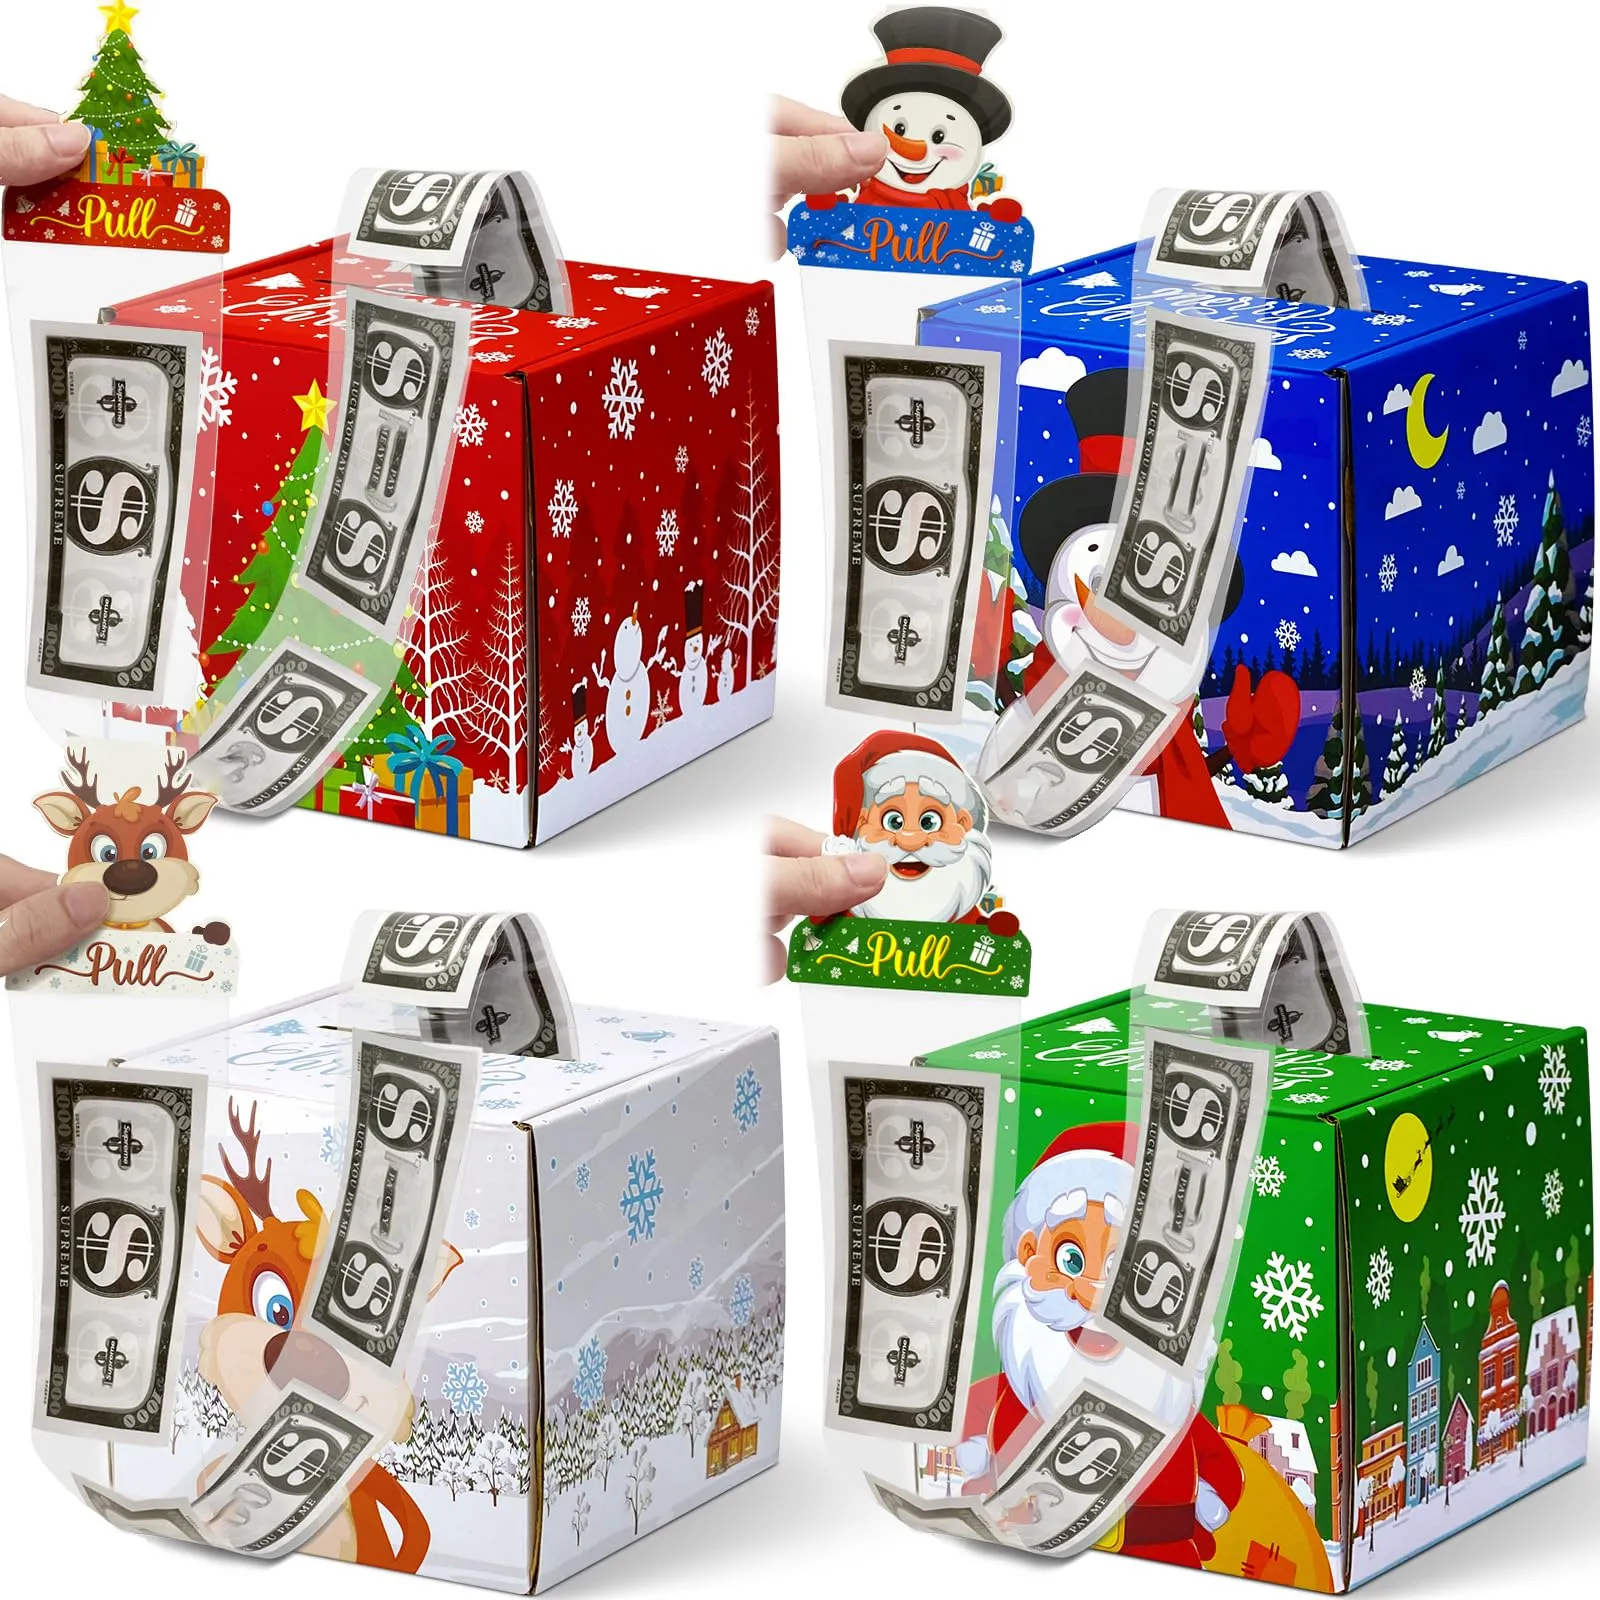 christmas gift boxes cookie boxes treat boxes 3d xmas house cardboard gable boxes for candy holiday party favor supplies christmas boxes for gift giving 6x3.5x3.5 inches